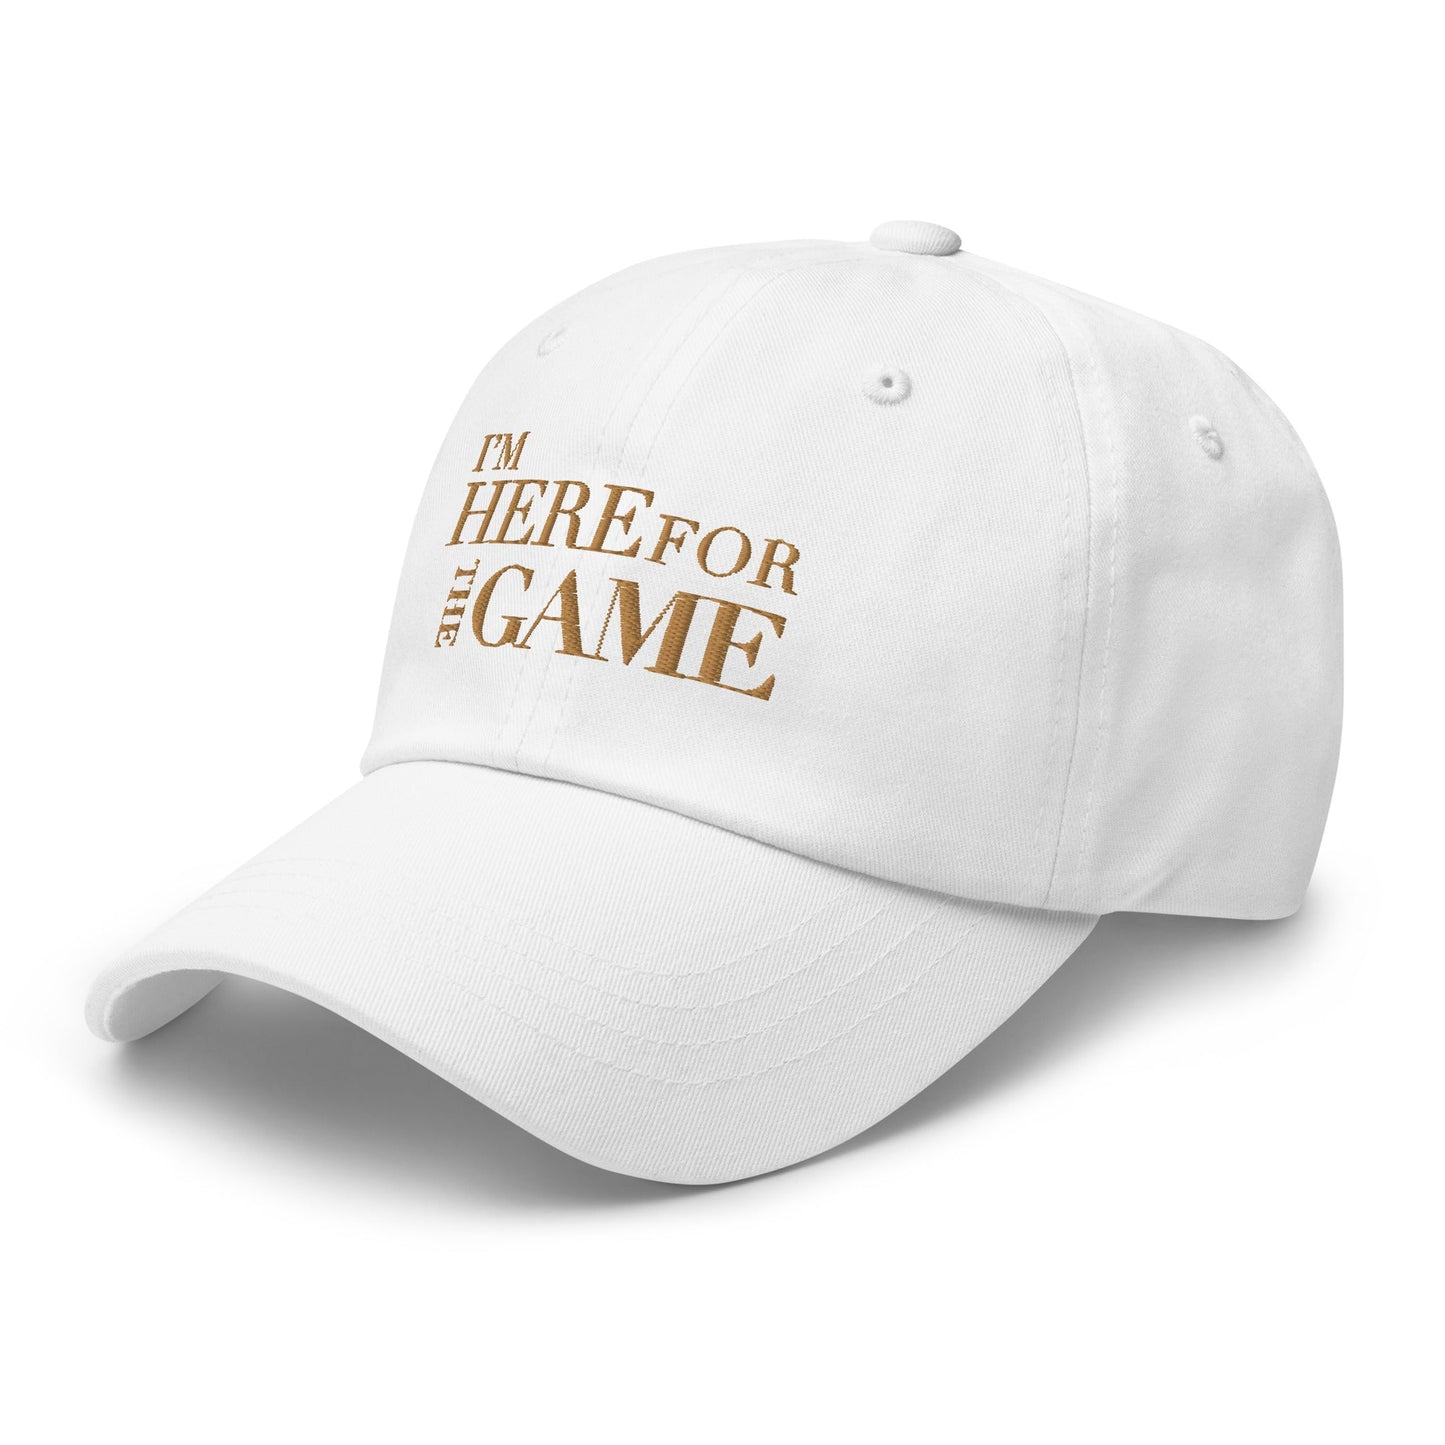 Old Gold Logo Hat - I’m Here For The Game